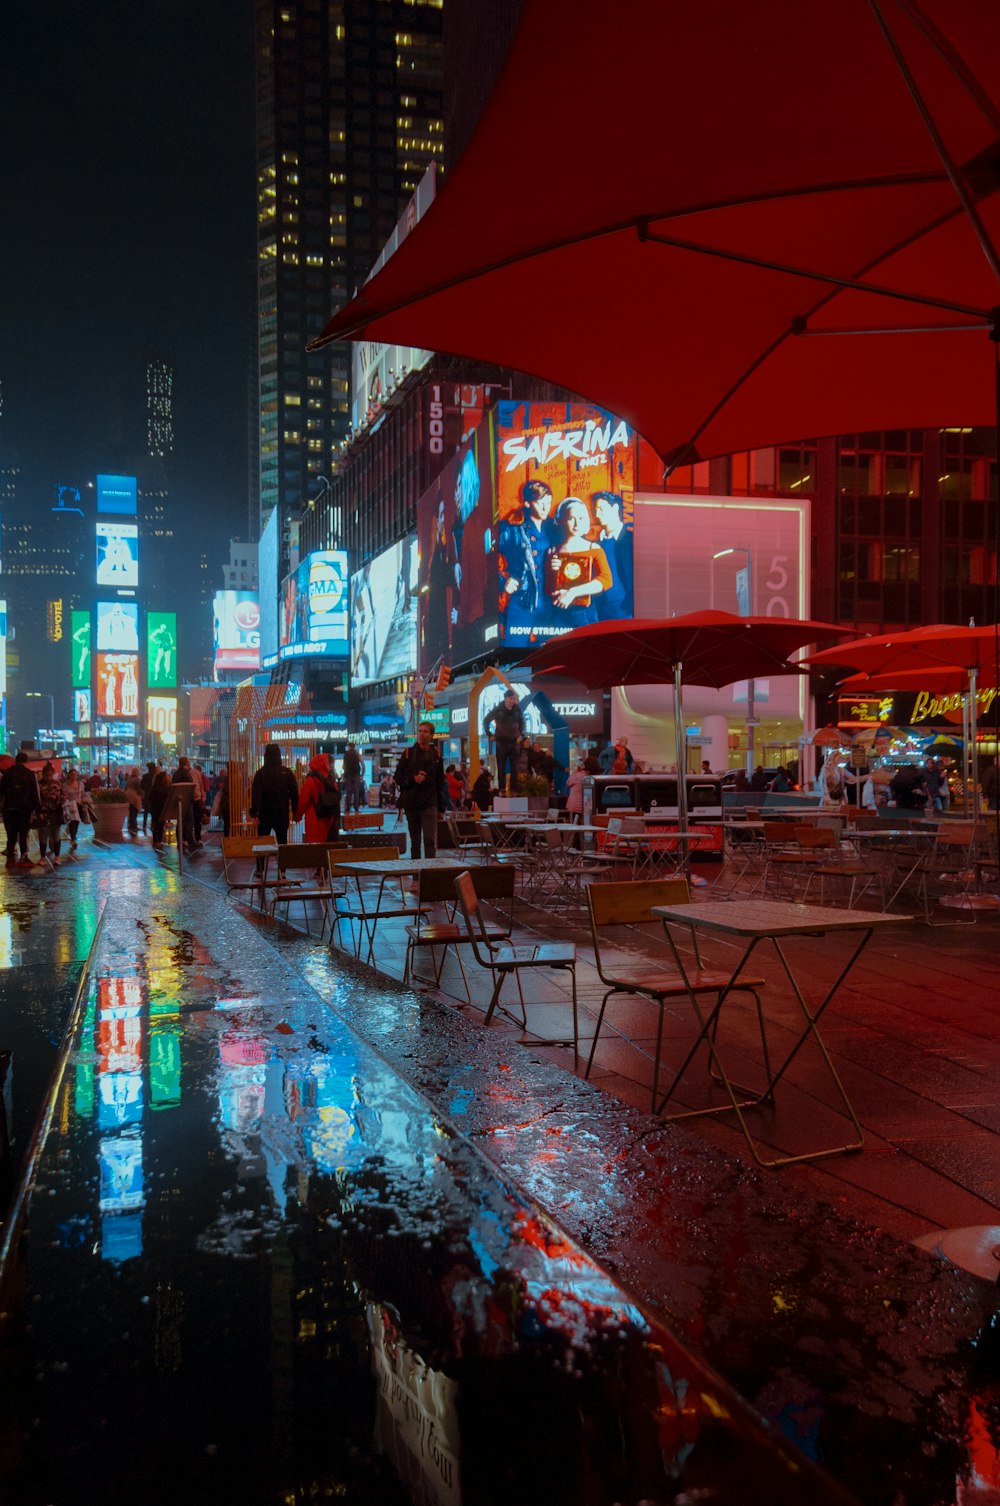 people sitting on chair under red umbrella during night time